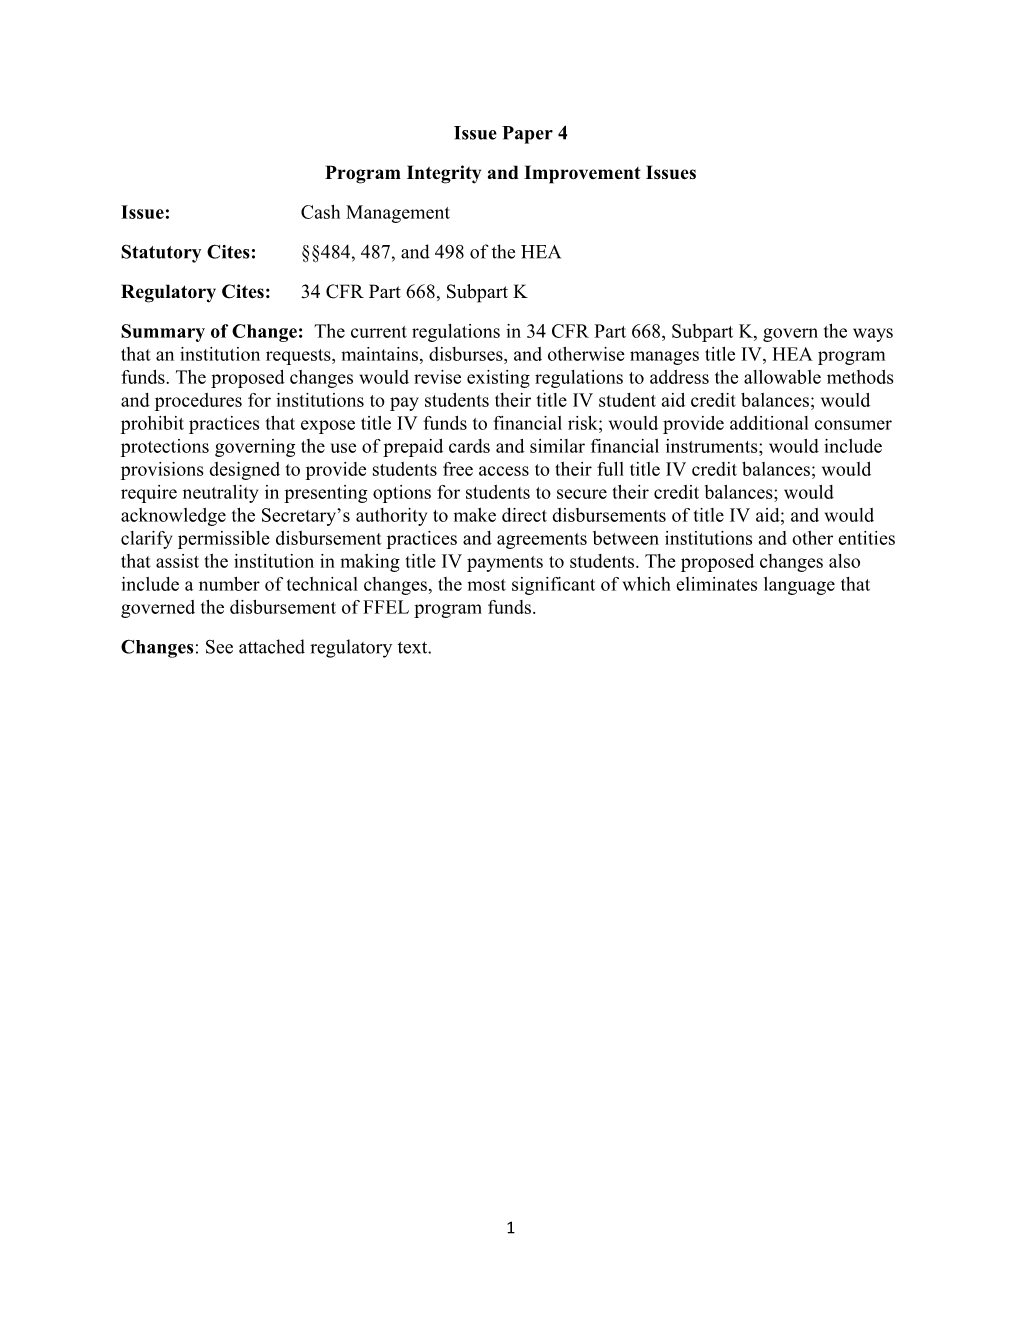 Negotiated Rulemaking for Higher Education 2012-2014: PII Session 3 - Issue Paper 4, Cash